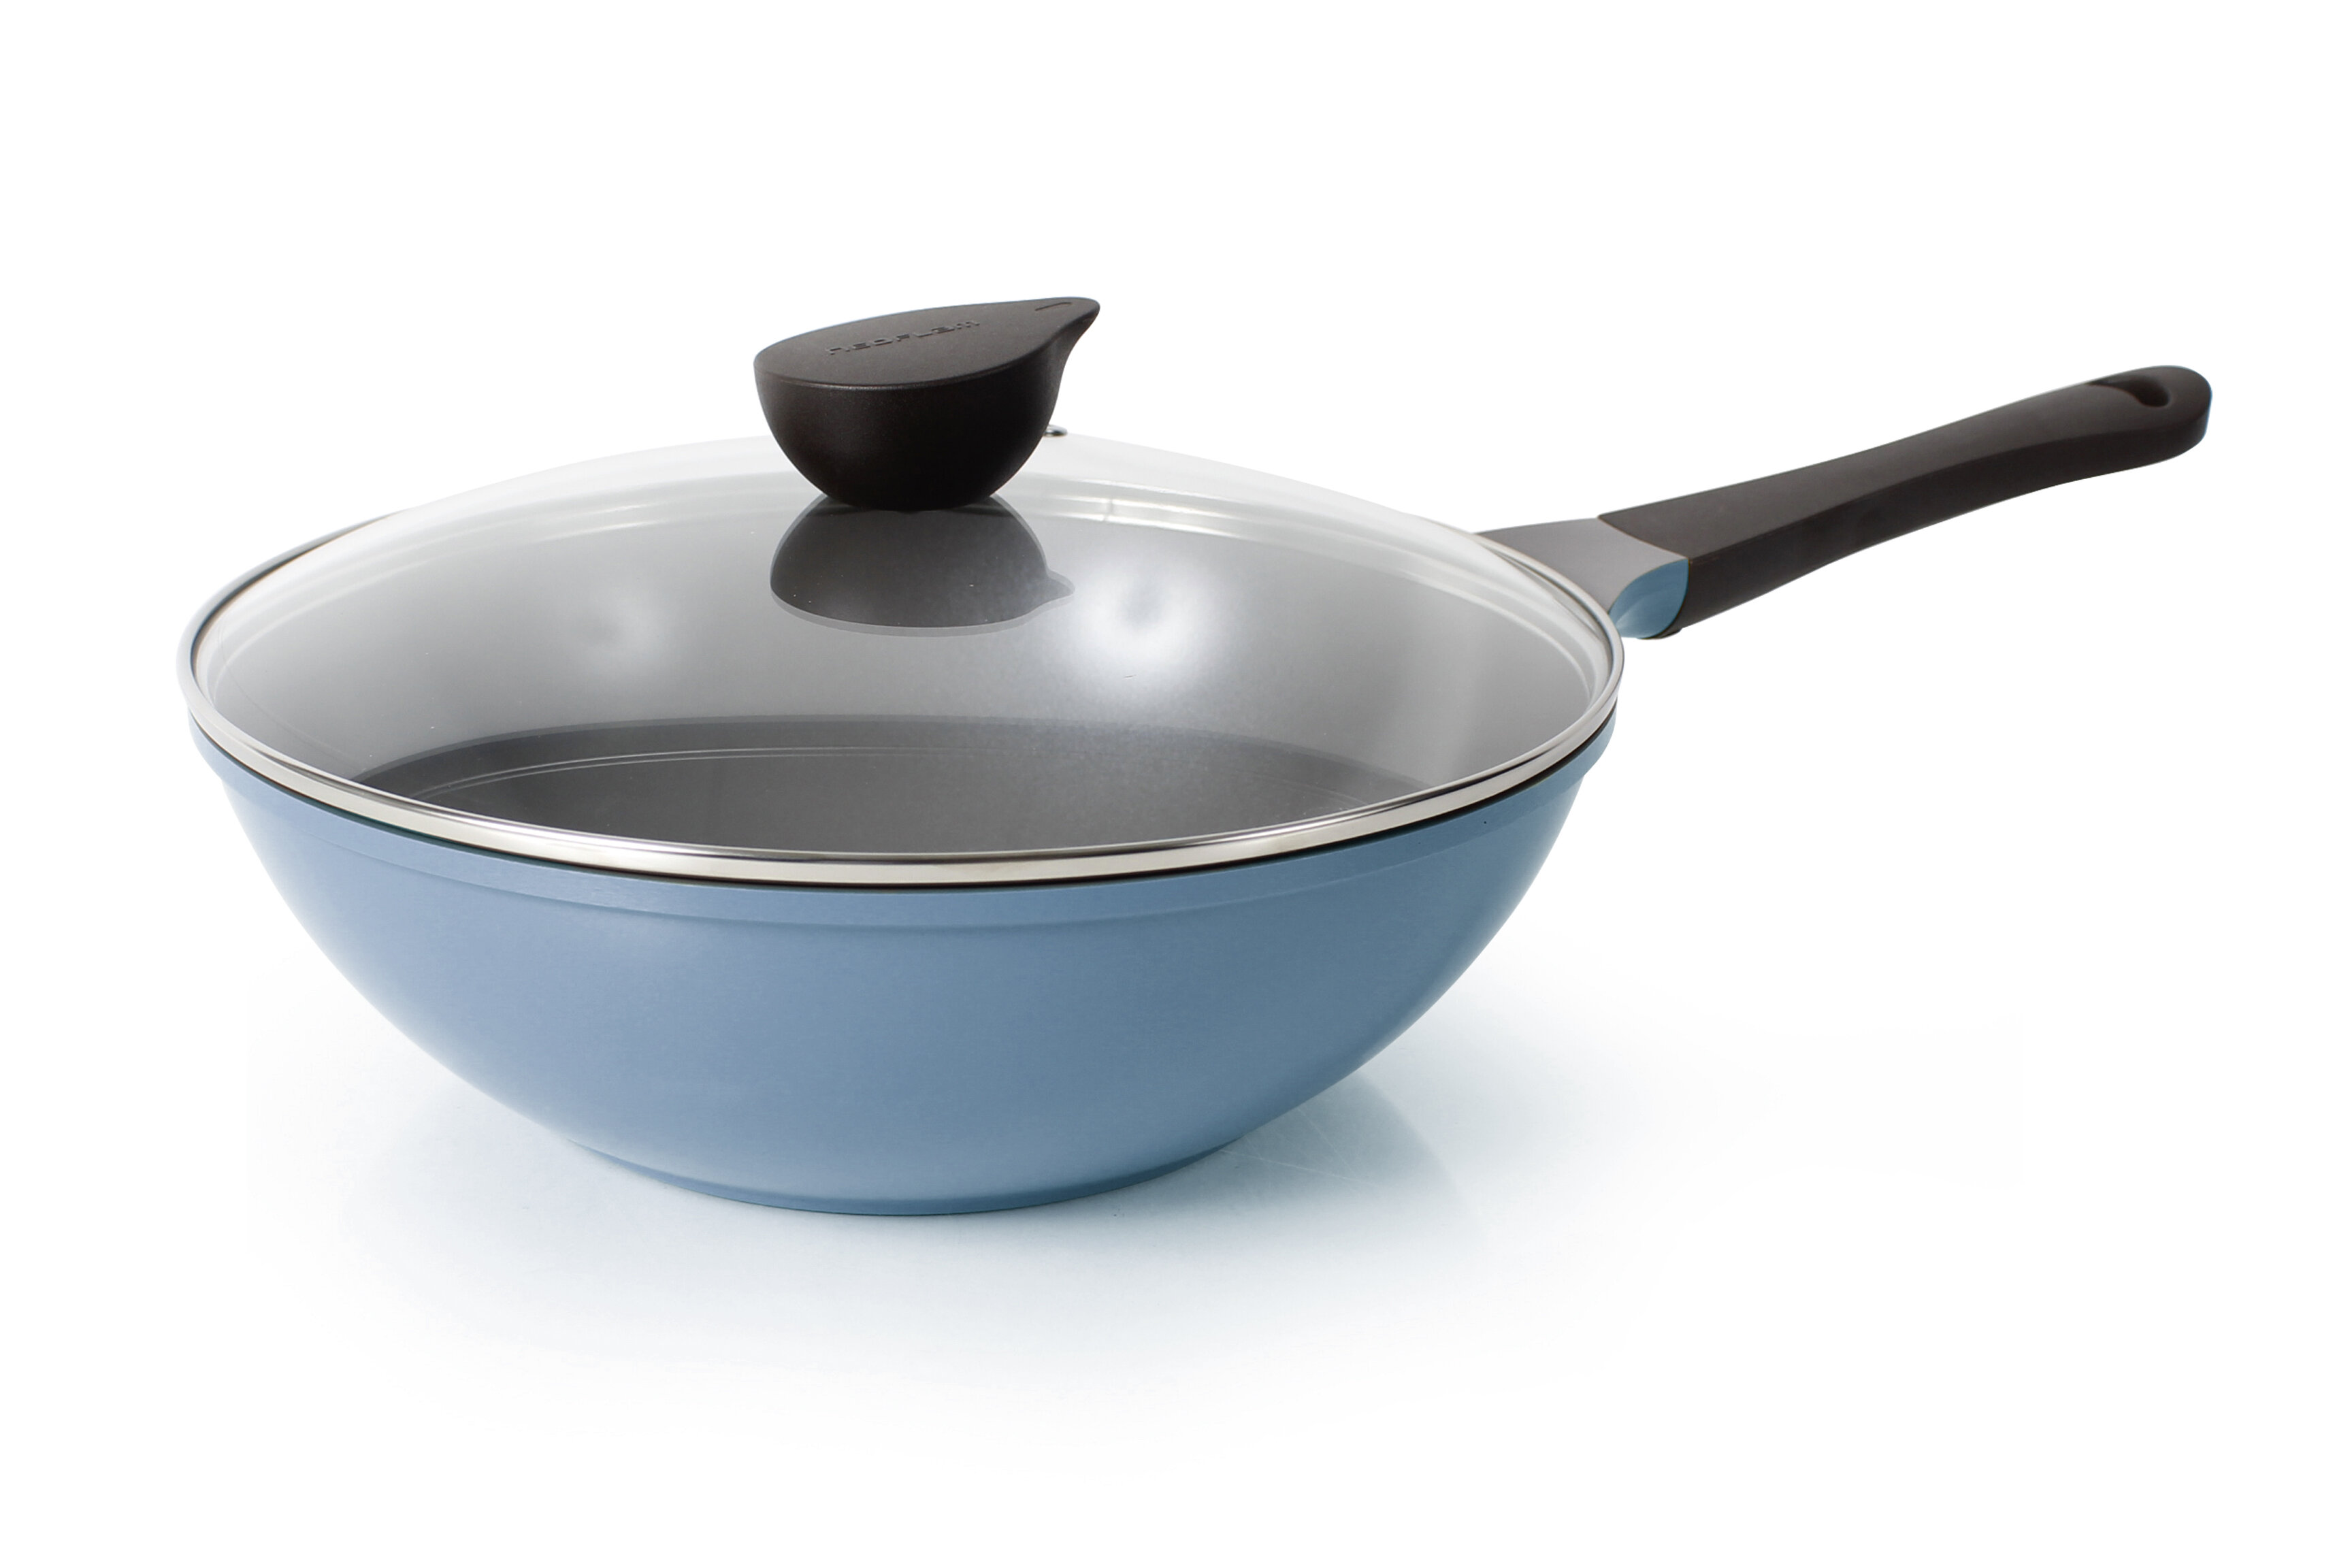 NEOFLAM 2021 SS Cookware & Bakeware